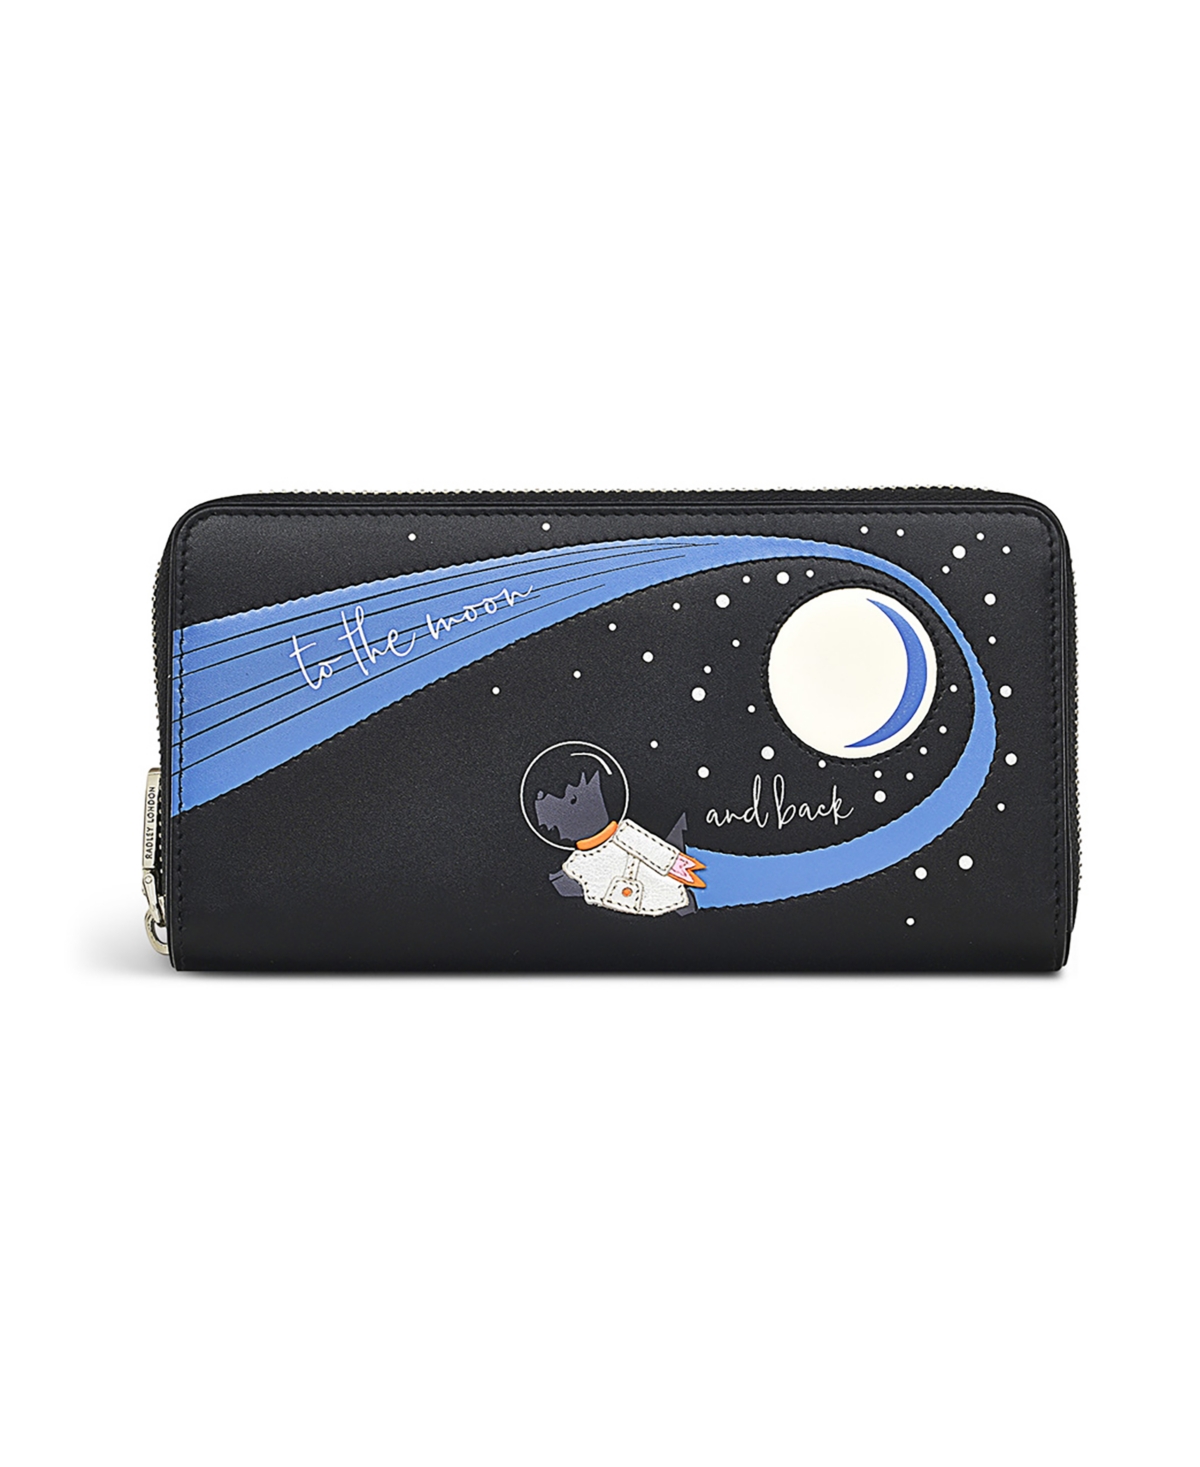 To The Moon and Back Mini Leather Zip Around Wallet - Black